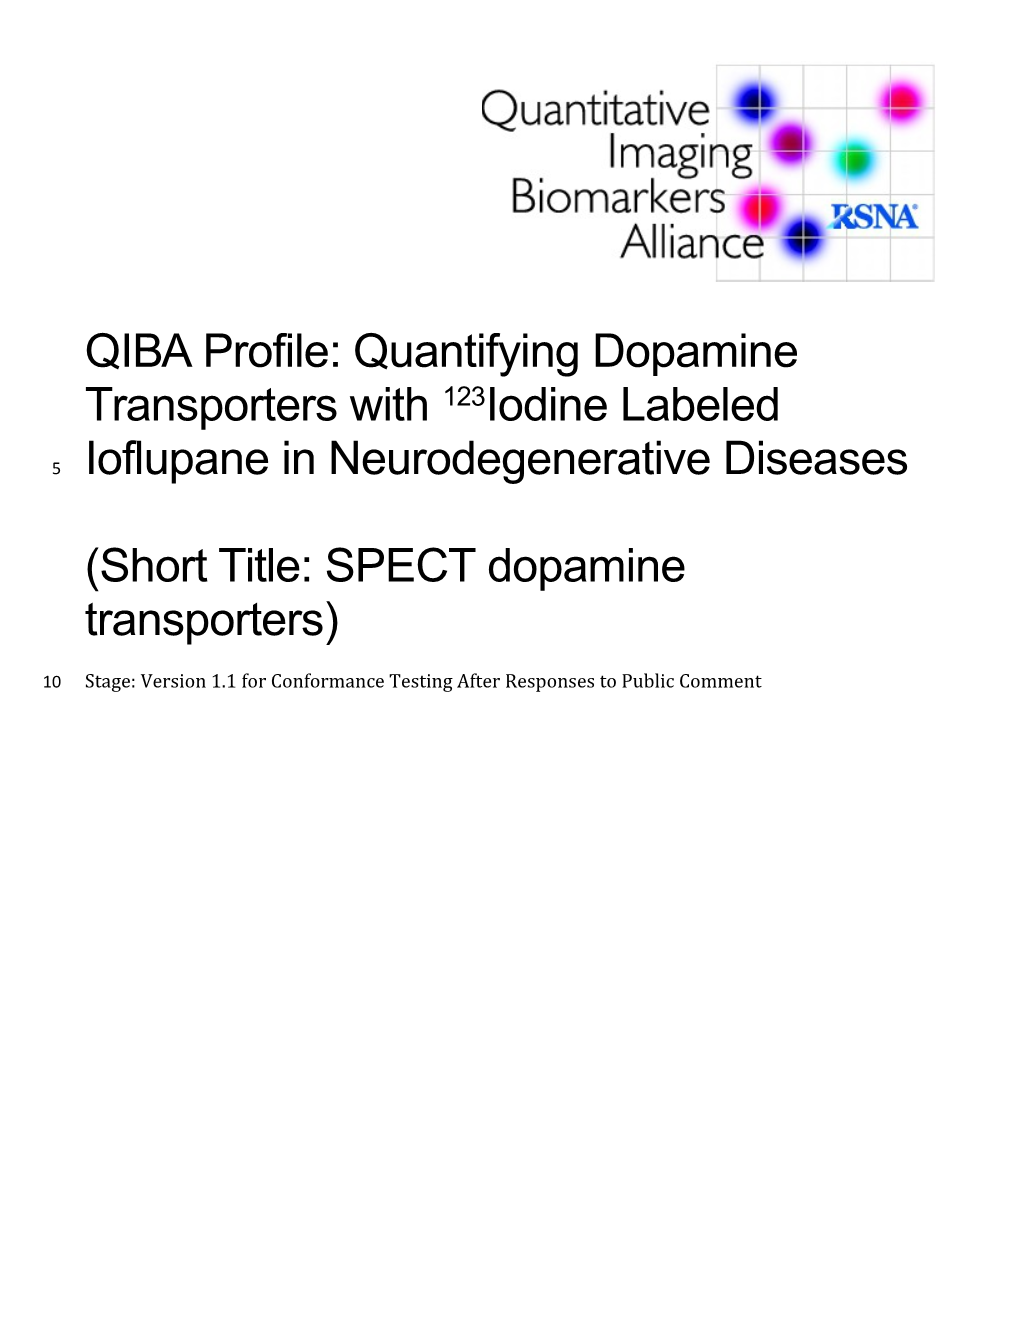 SPECT Dopamine Transporters (Continued)